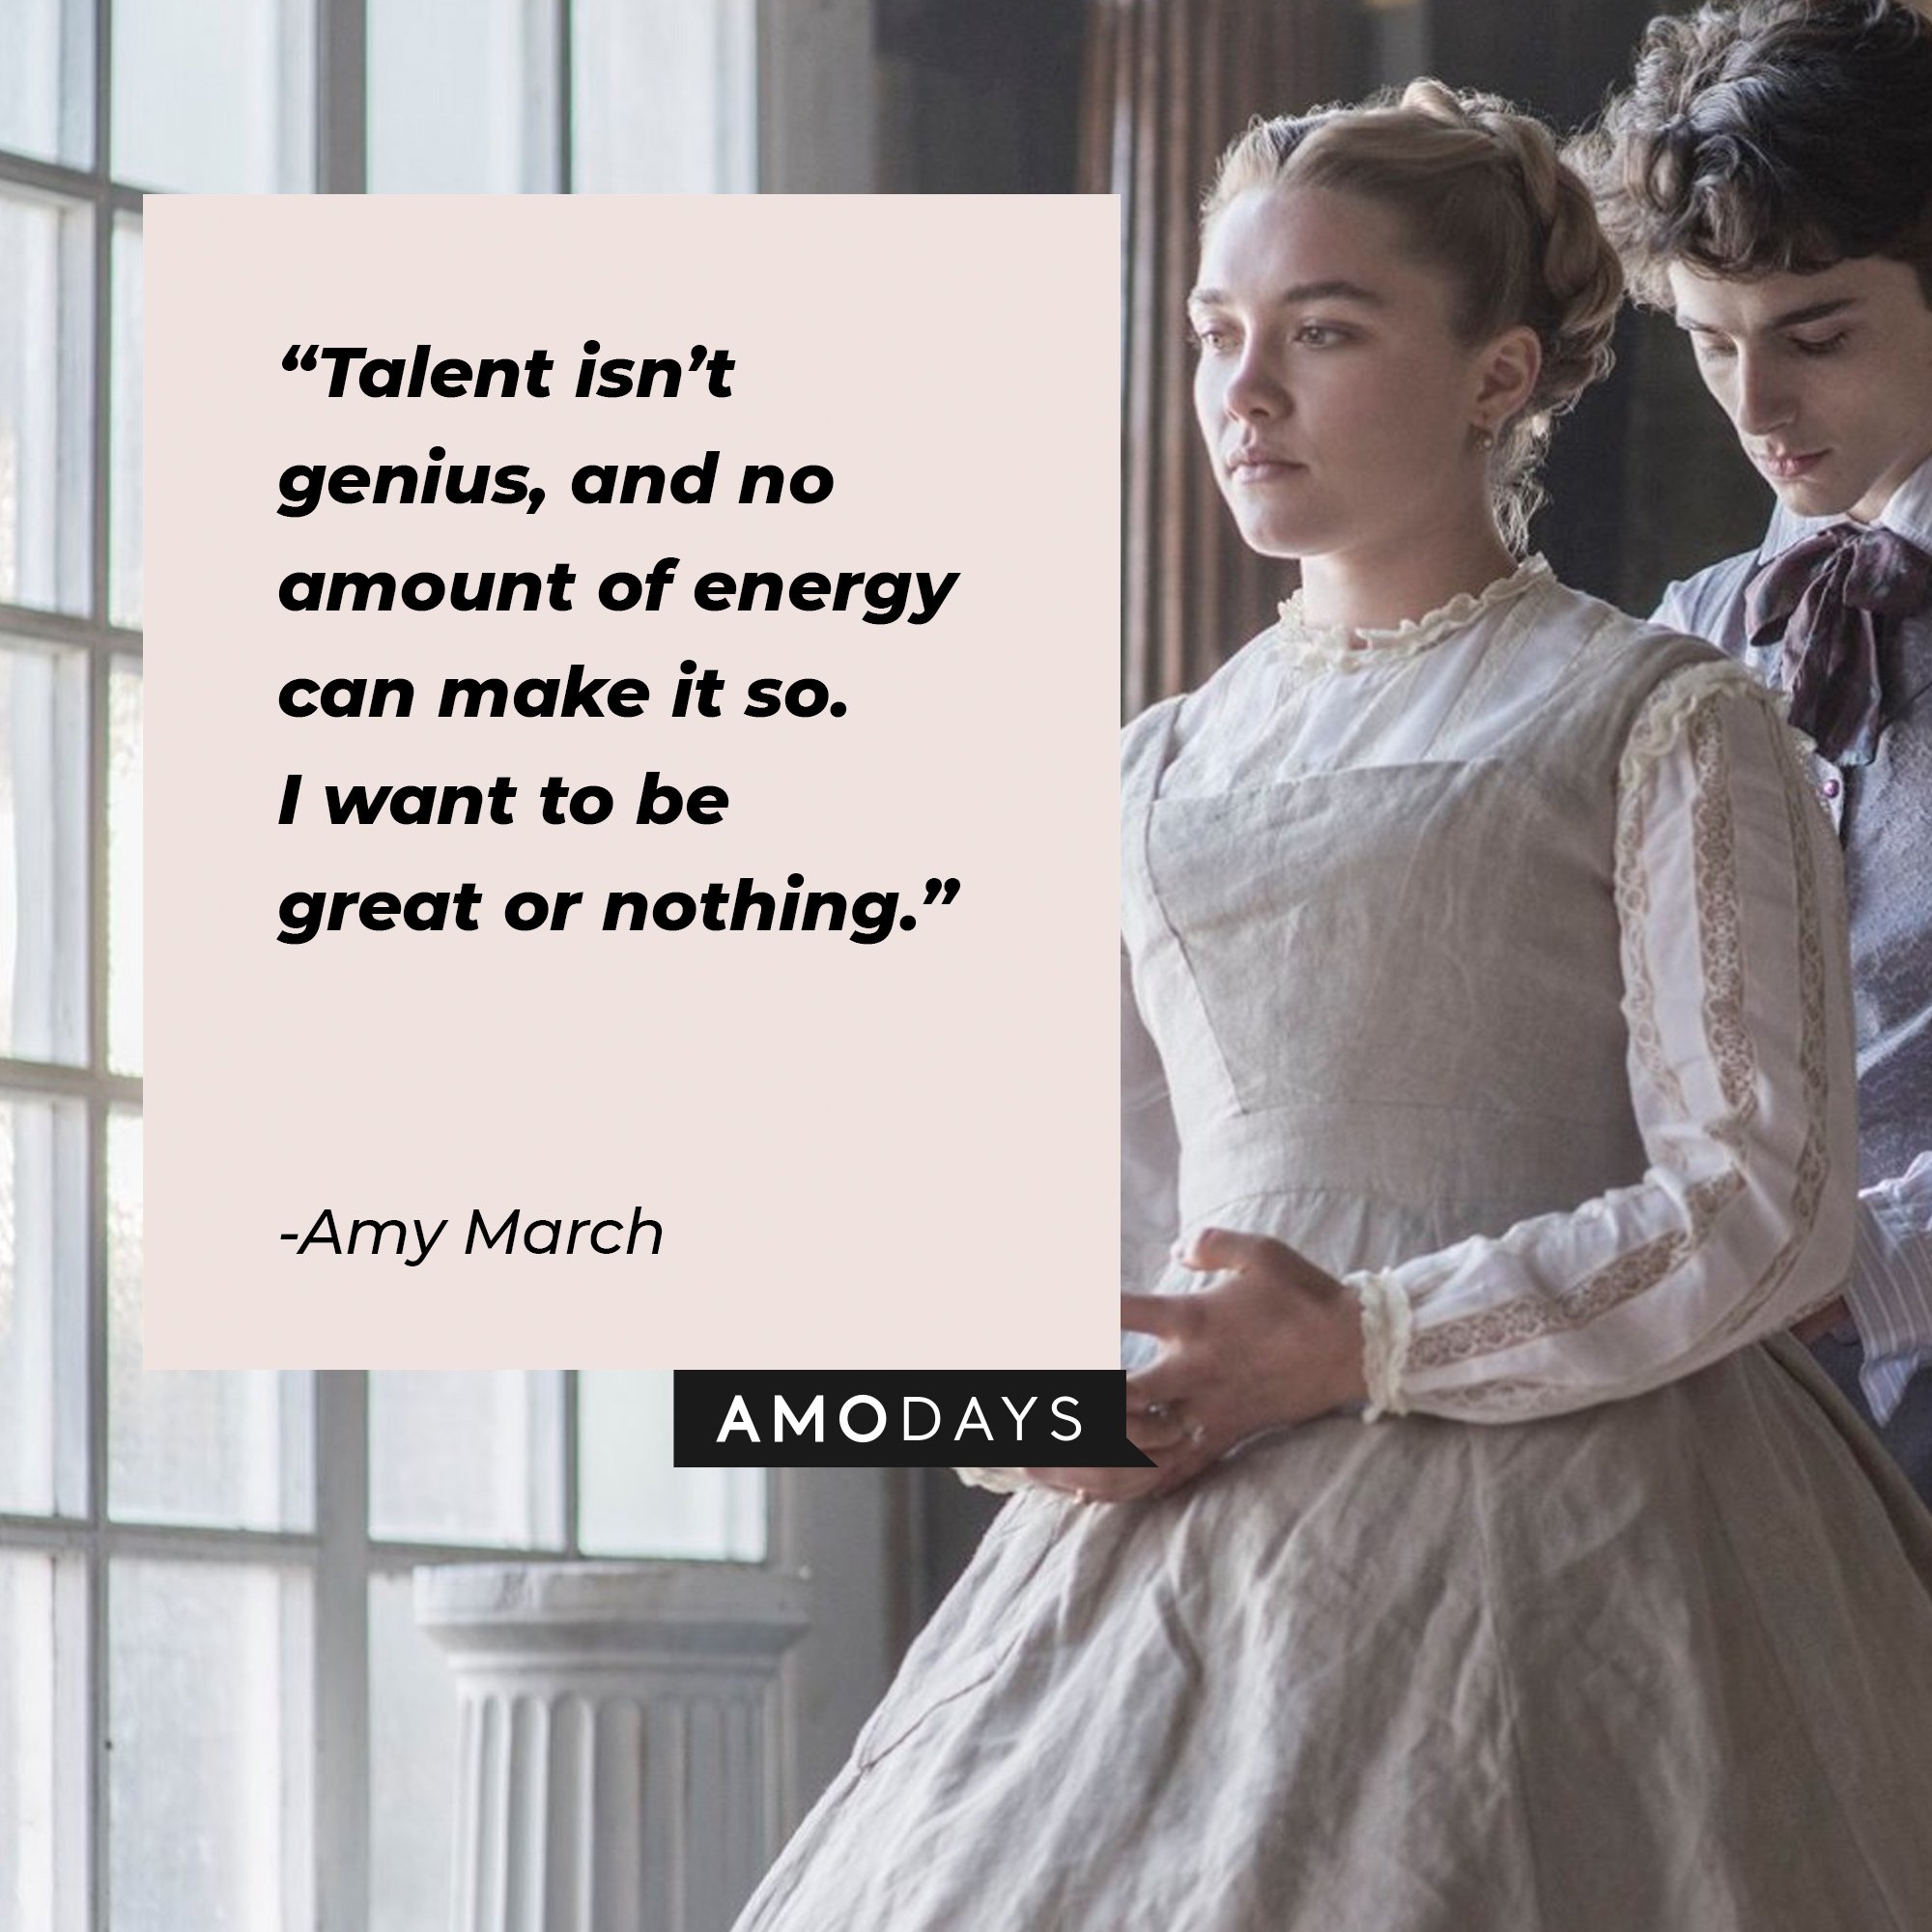 Amy March’s quote: “Talent isn’t genius, and no amount of energy can make it so. I want to be great or nothing.”  | Image: AmoDays